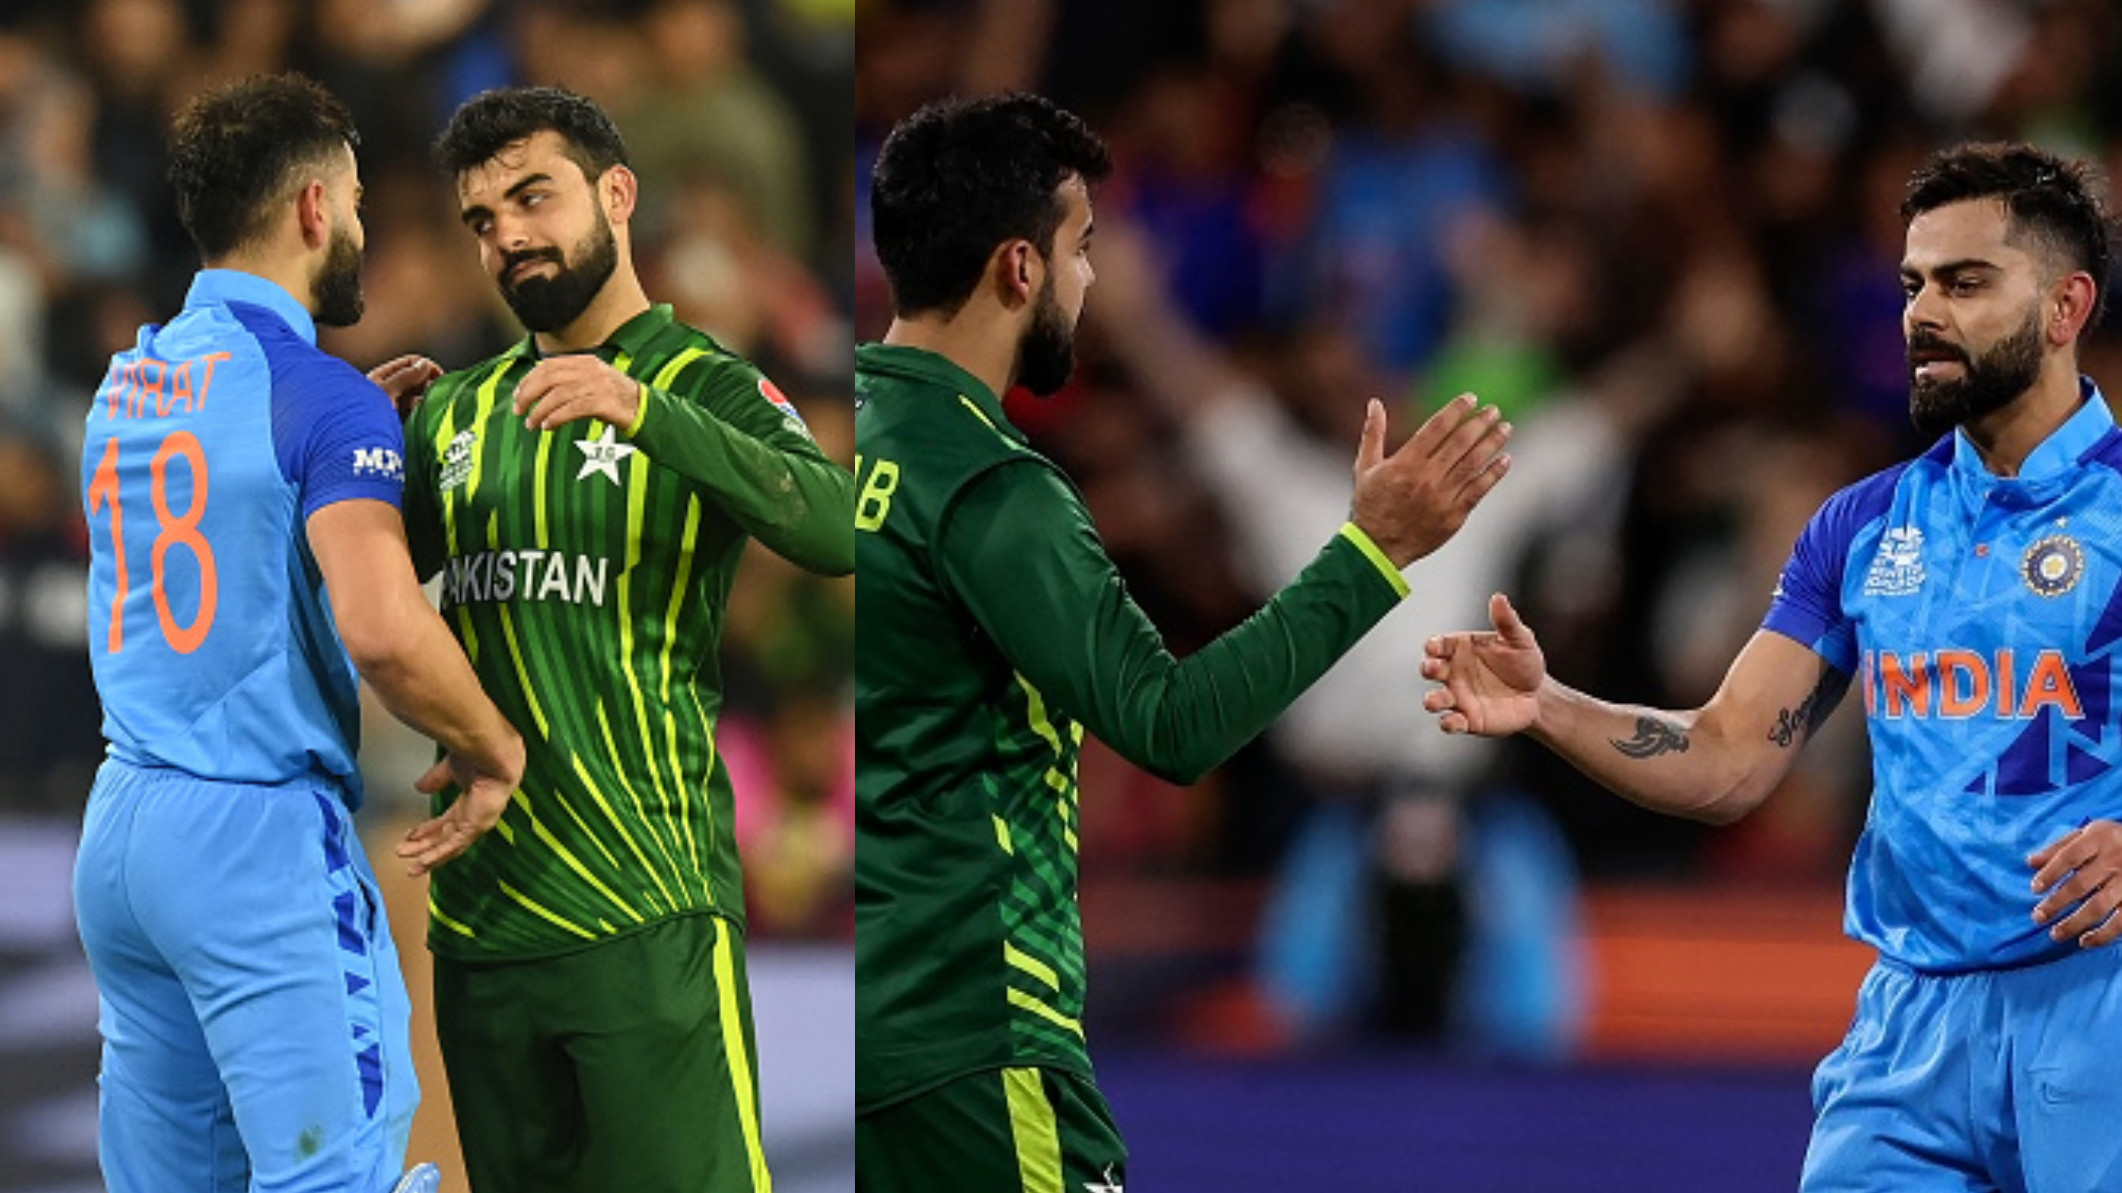 CWC 2023: “No benefit, if we win against India and lose the World Cup”- Shadab Khan of Pakistan